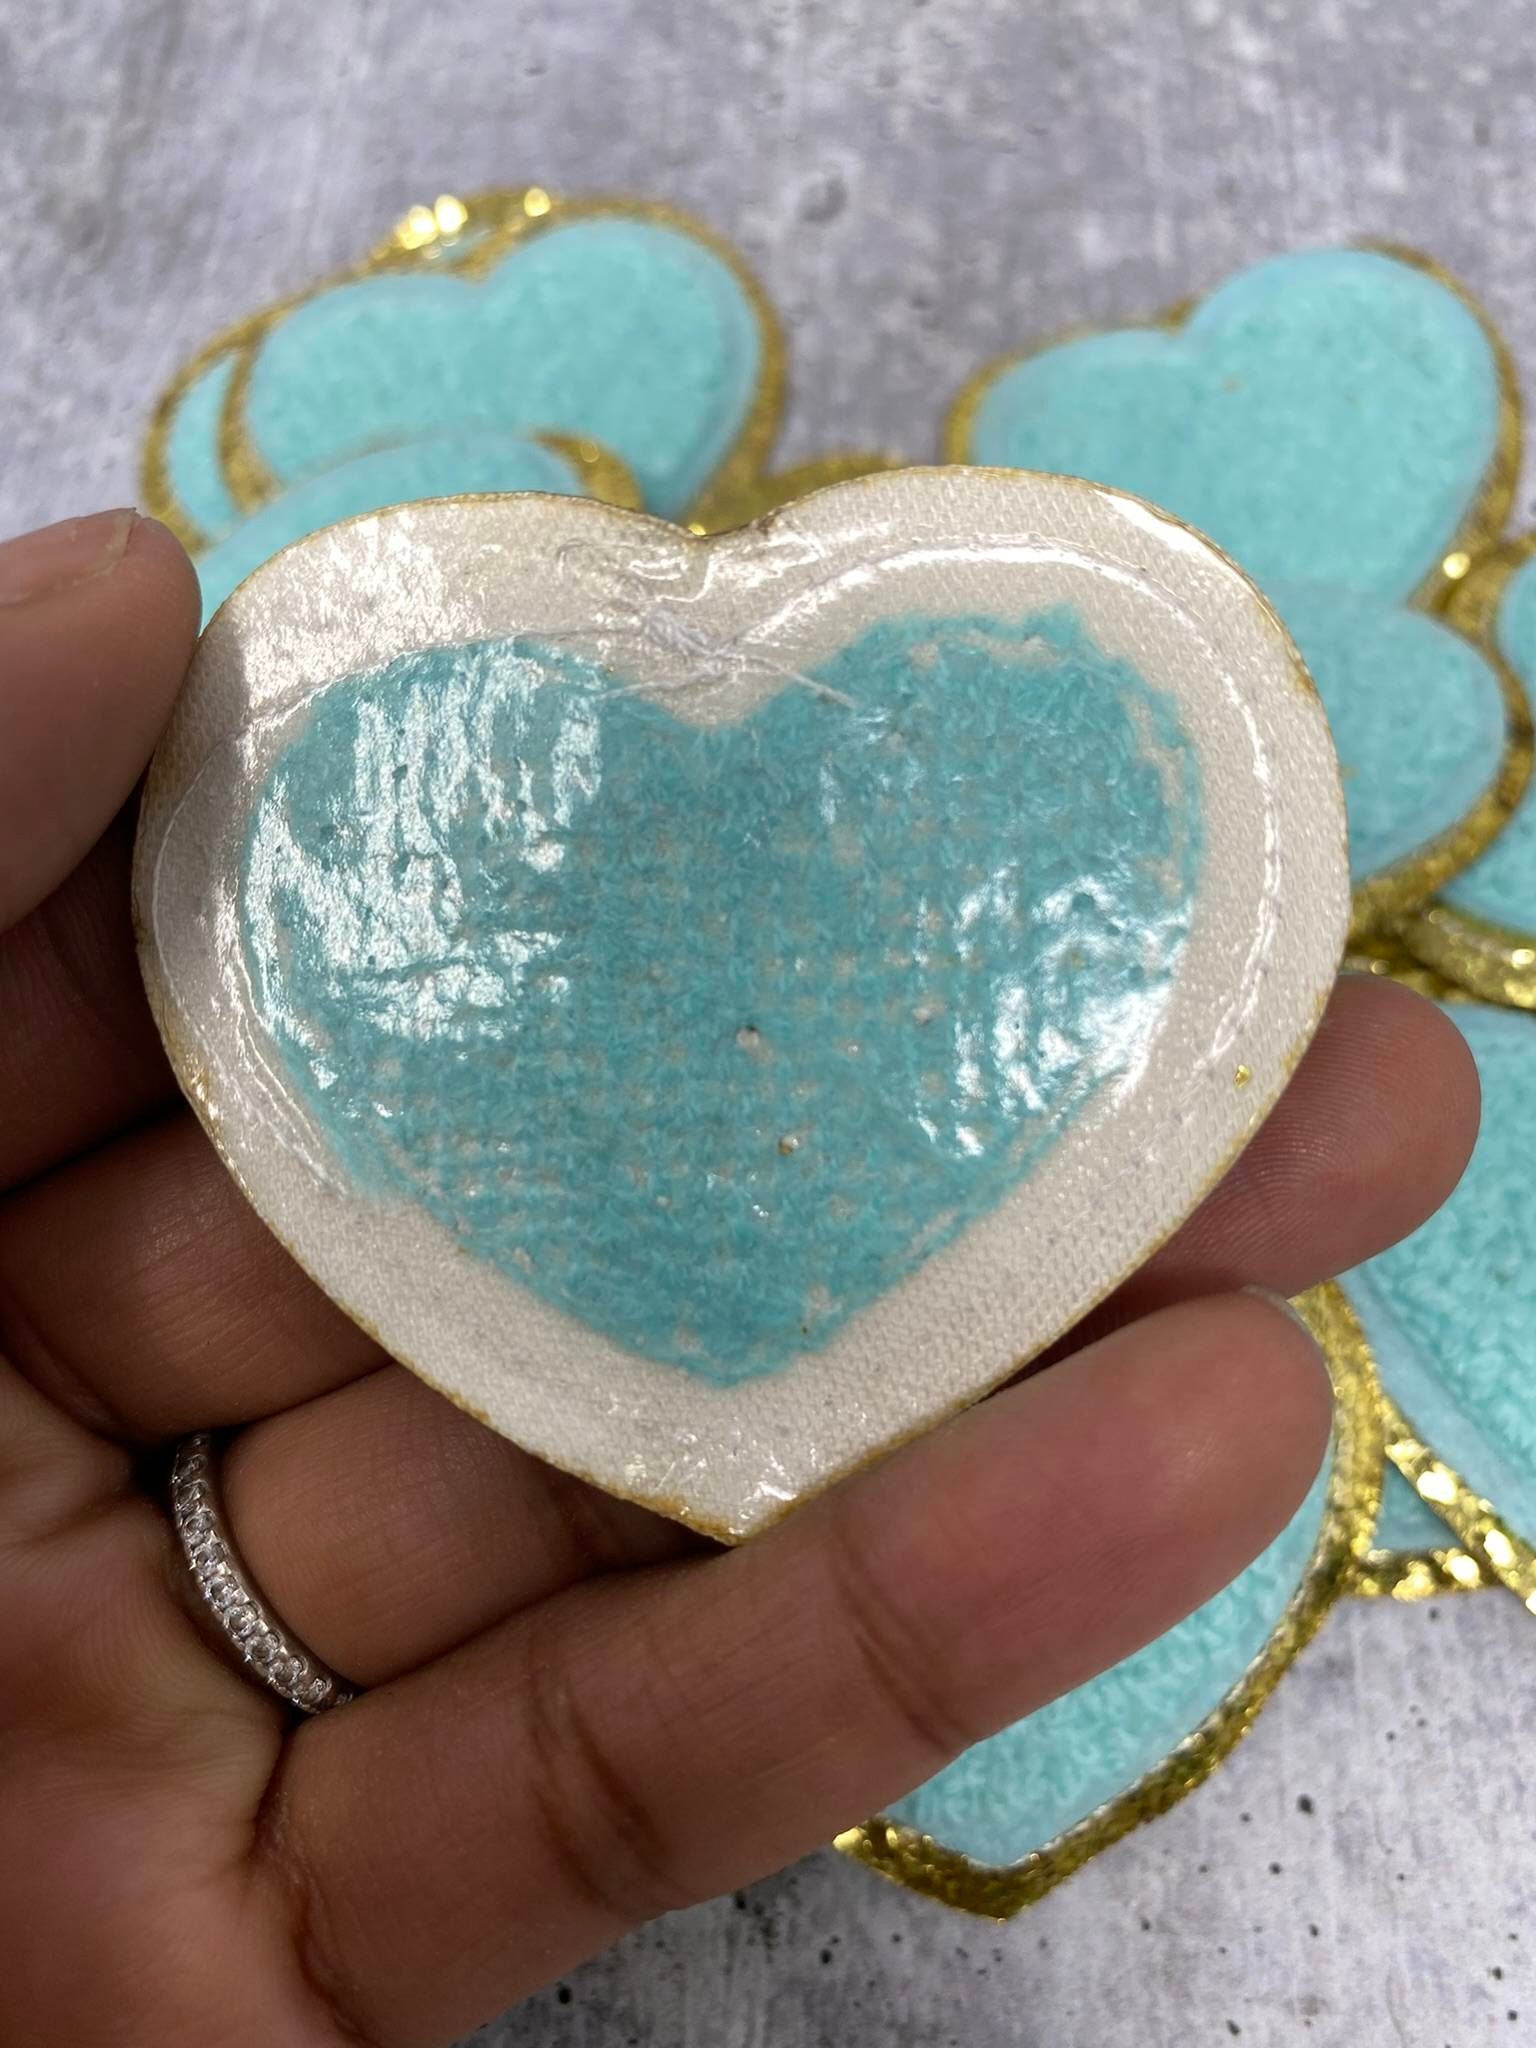 New: Aqua Blue, 1-pc, Chenille "Heart Patch" w/Gold Glitter, Size 2.5", Love Patch w/ Iron-on Backing, Fuzzy Applique, Iron-on Patch